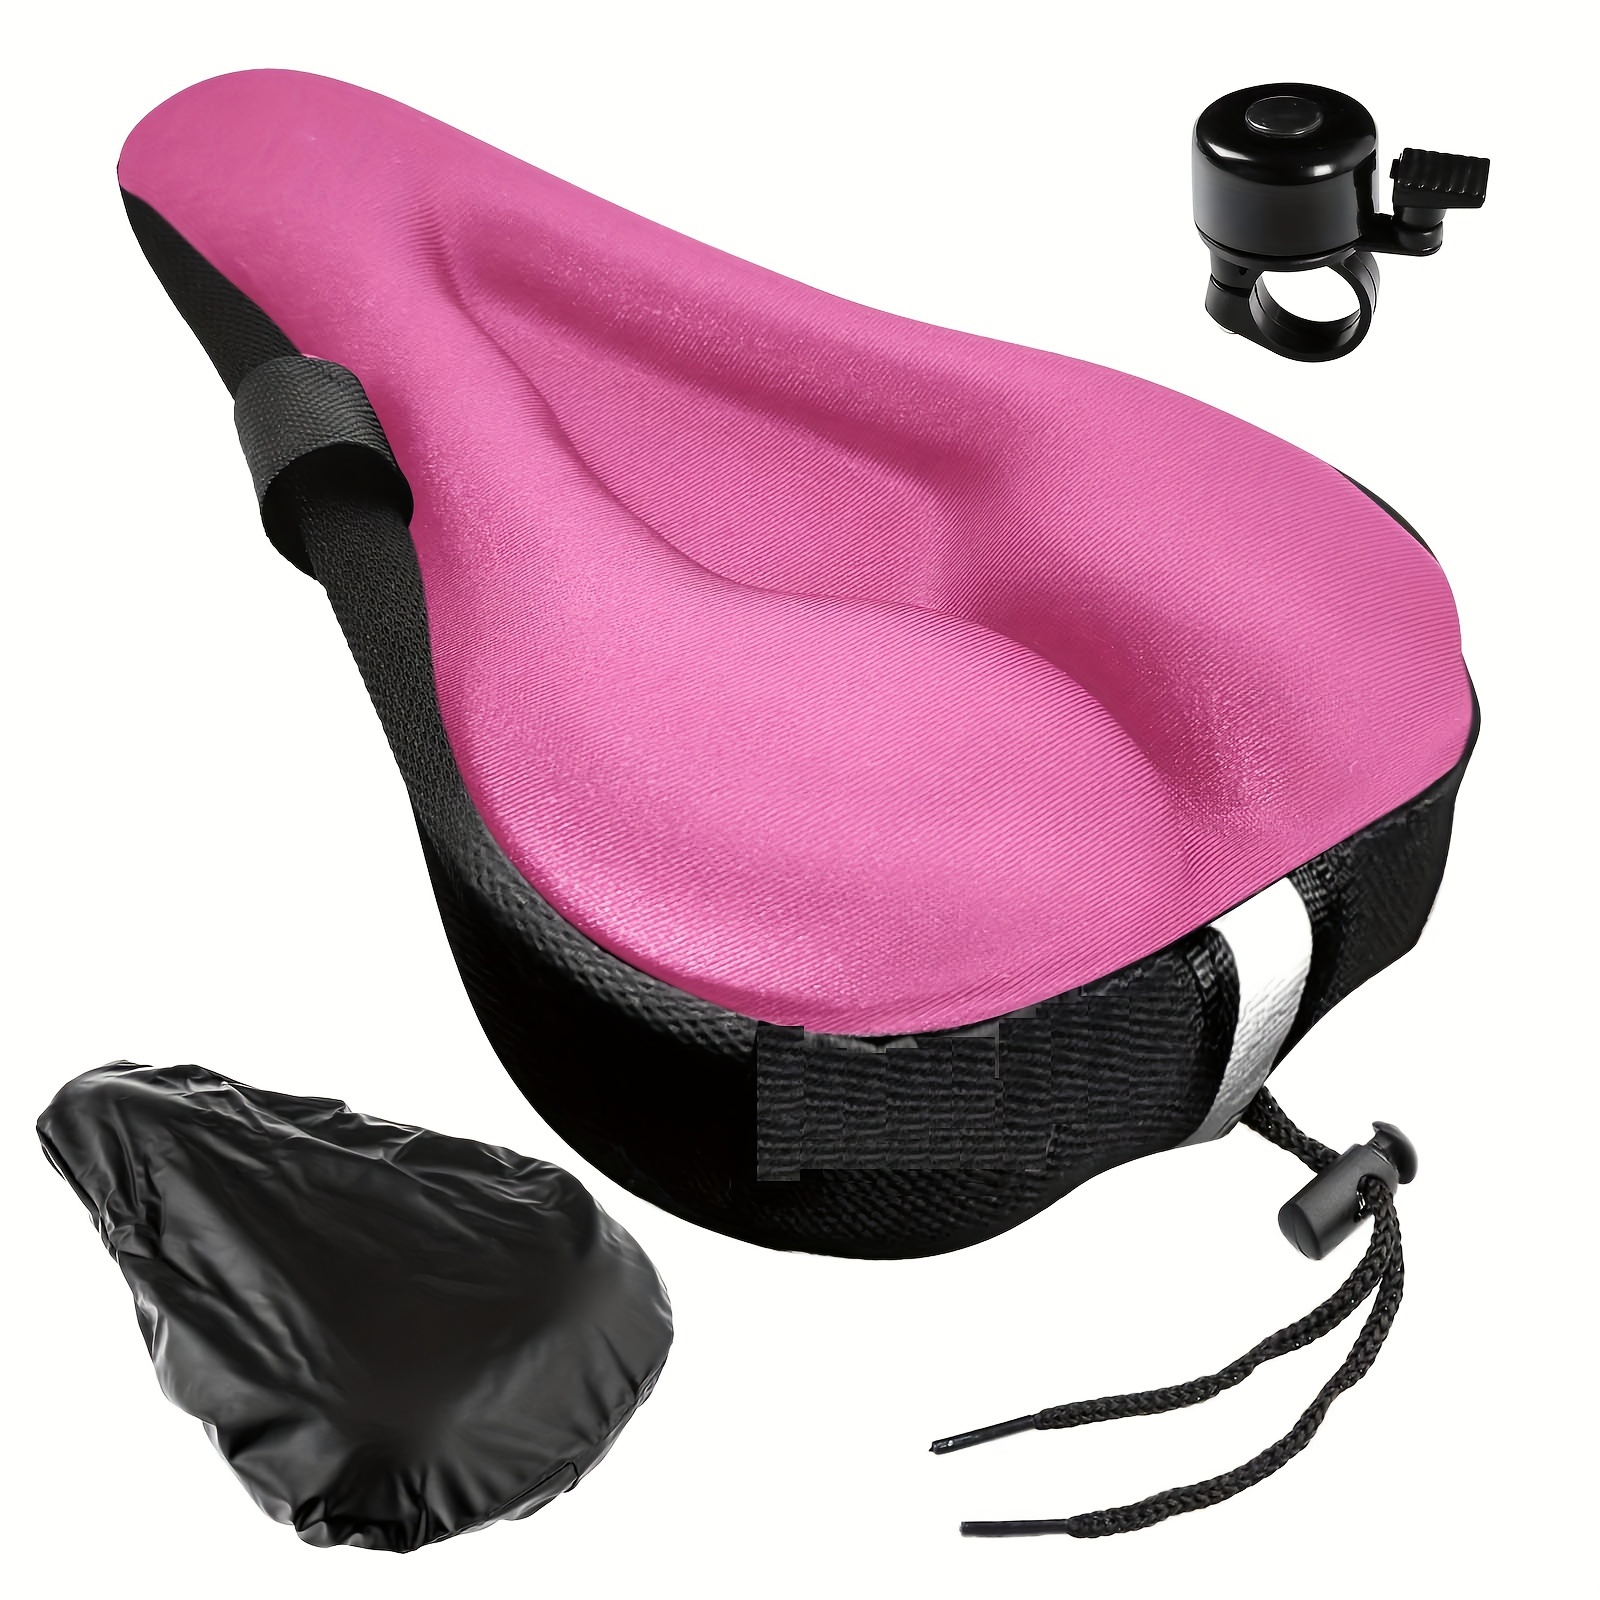 

Bike Seat Cushion-gel Padded Bicycle Seat Cover Men And Women, Soft And Comfortable Seat Cover, With Water And Dust Resistant Cover